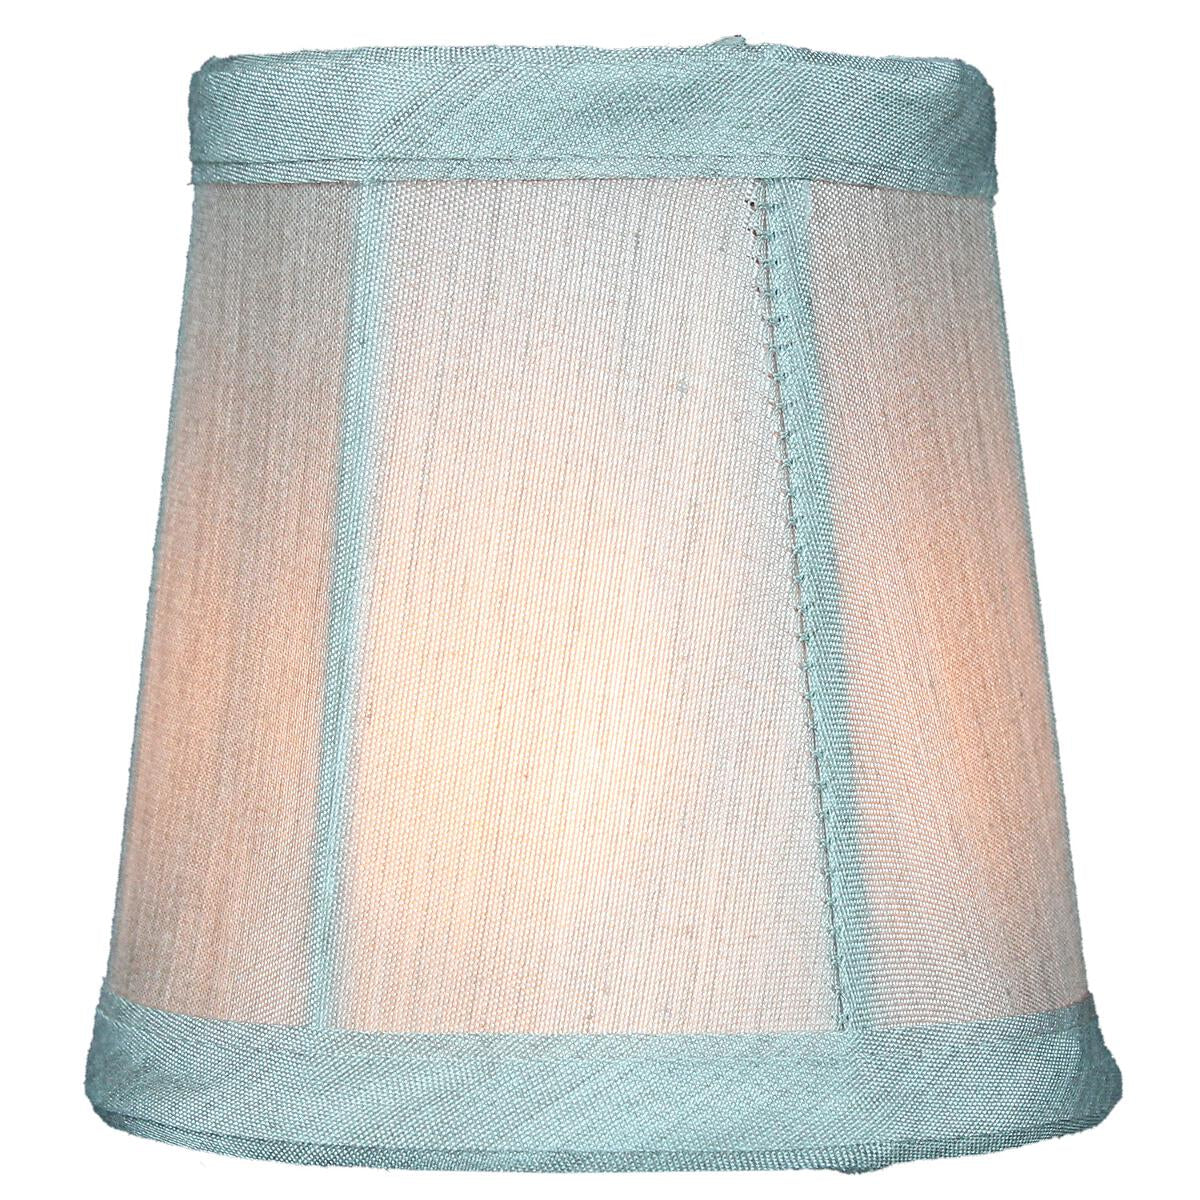 Set of 6 Gray Stretch Clip-On Candlelabra Clip-On Lamp shade 3x4x4